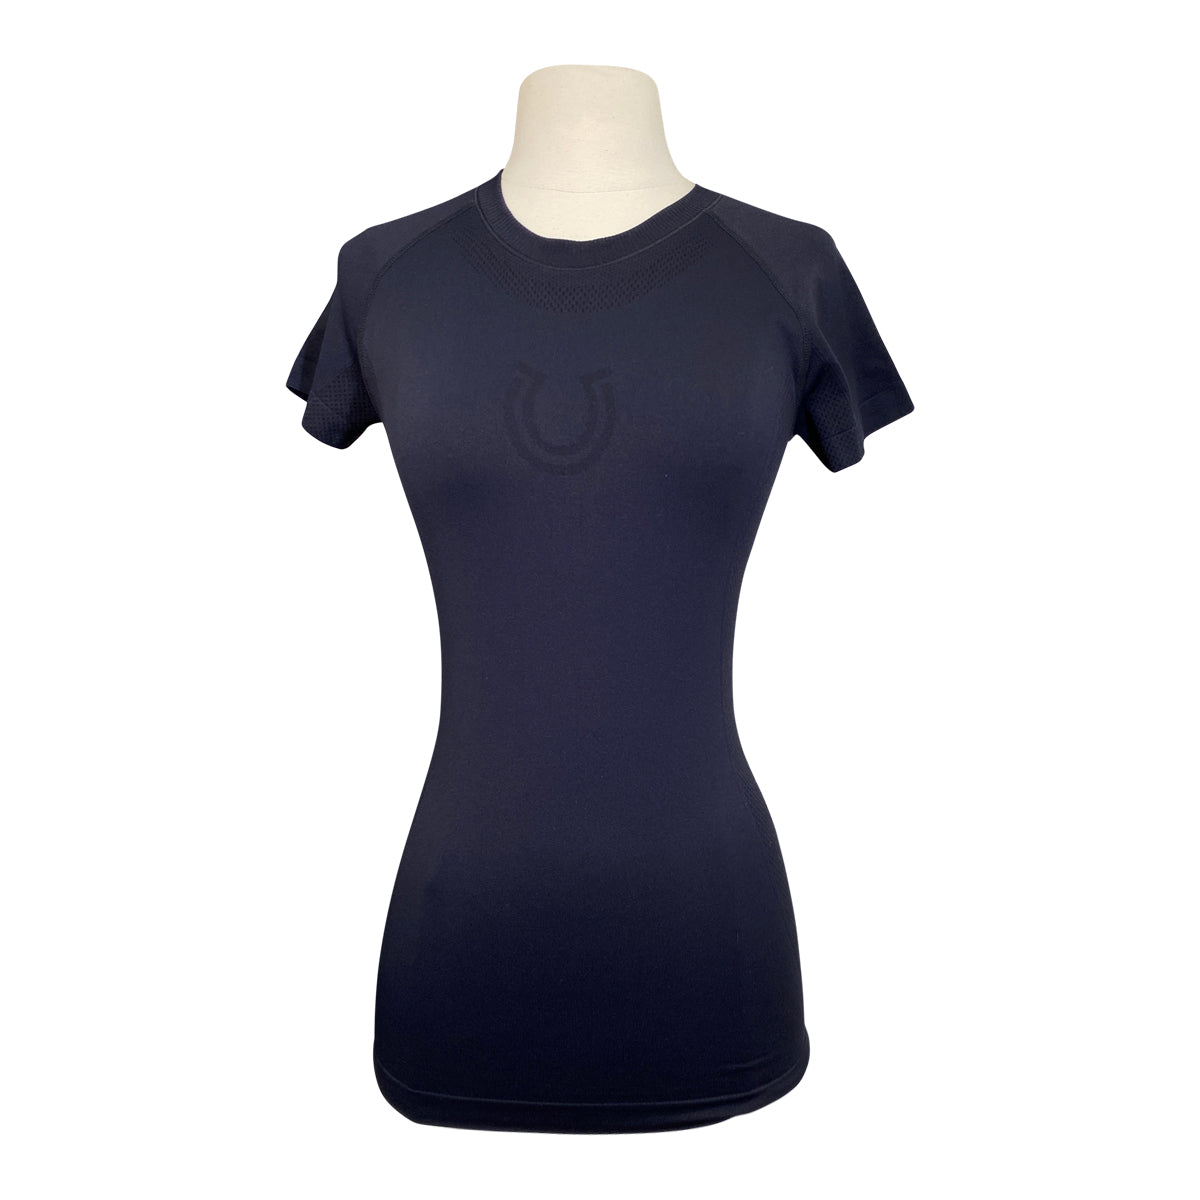 FitEq Short Sleeve Seamless Schooling Top in Black